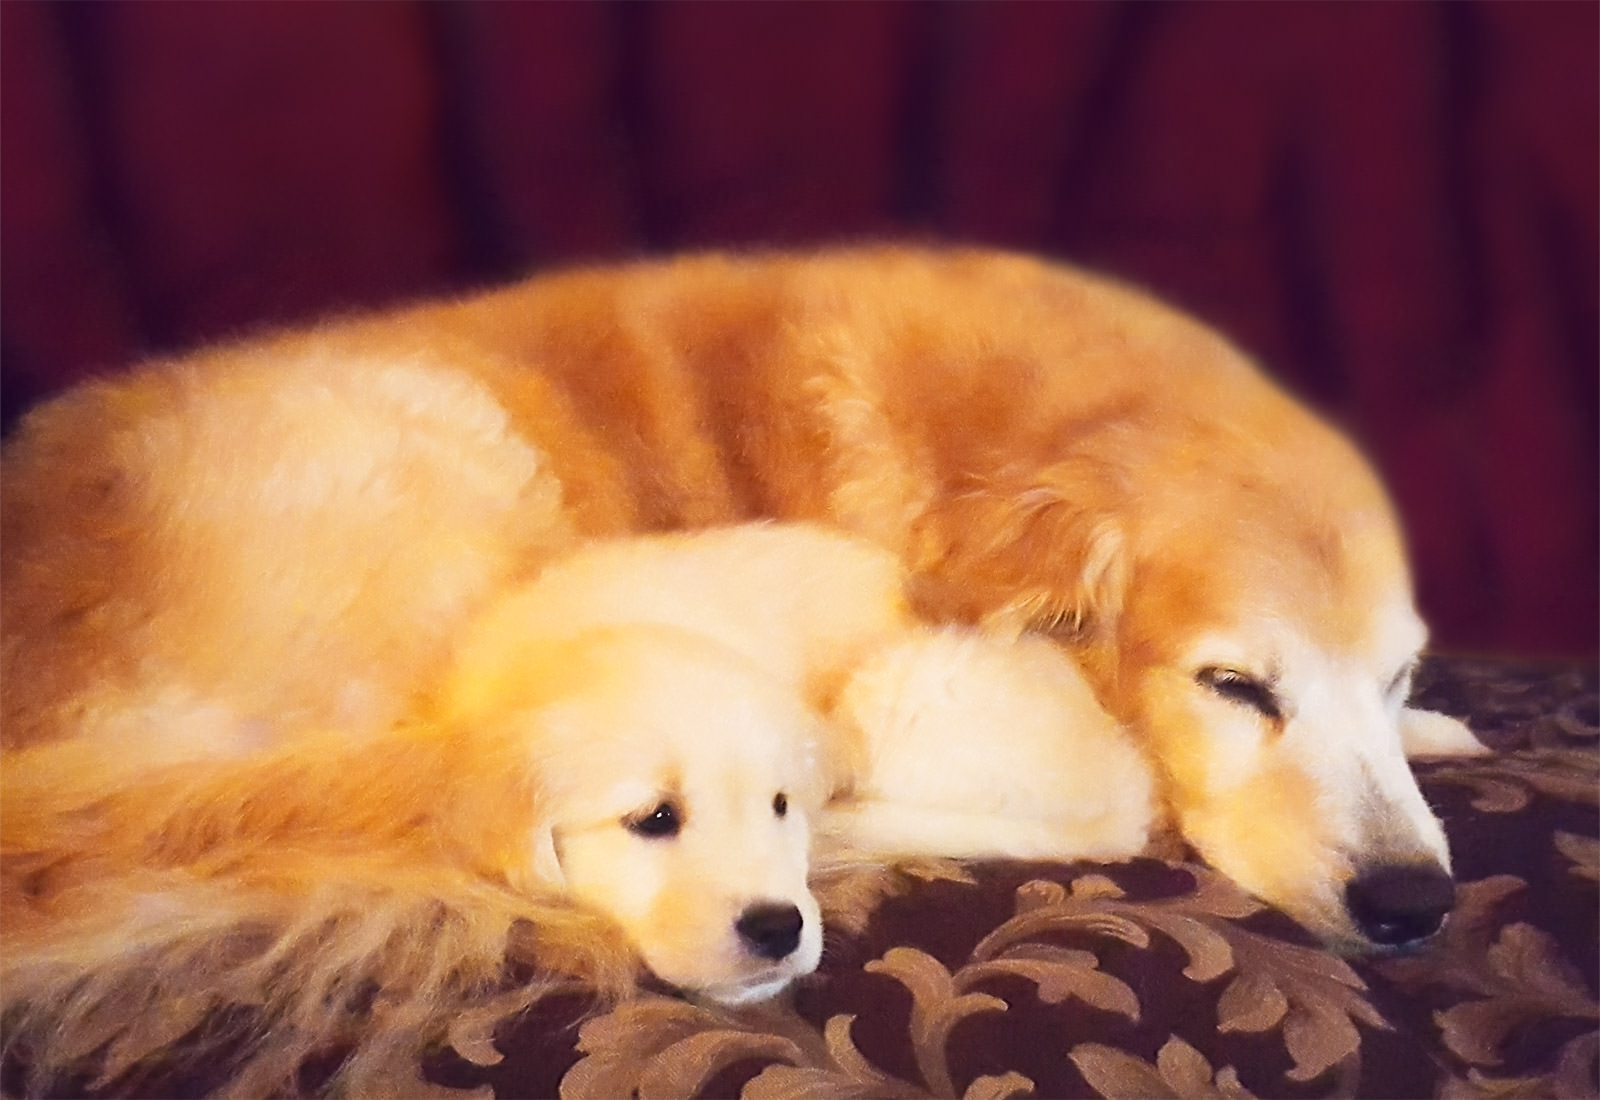 Golden Retriever puppy snuggling with her big sister